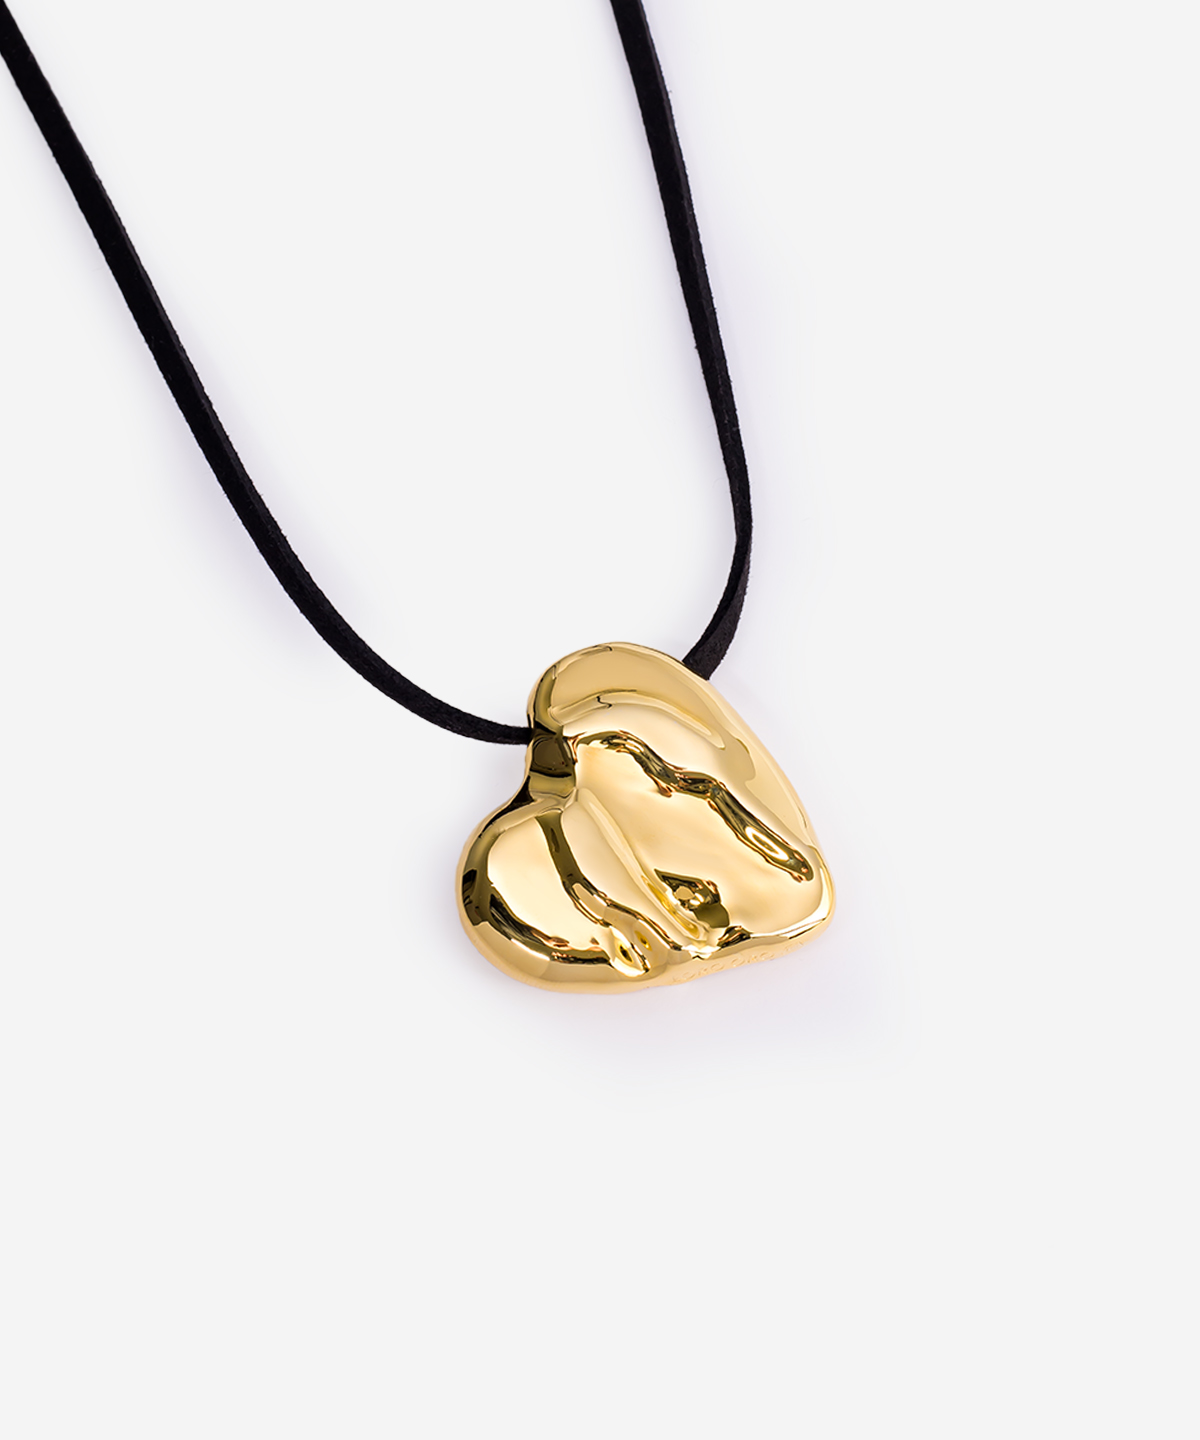 Kardia eremos gold-plated necklace